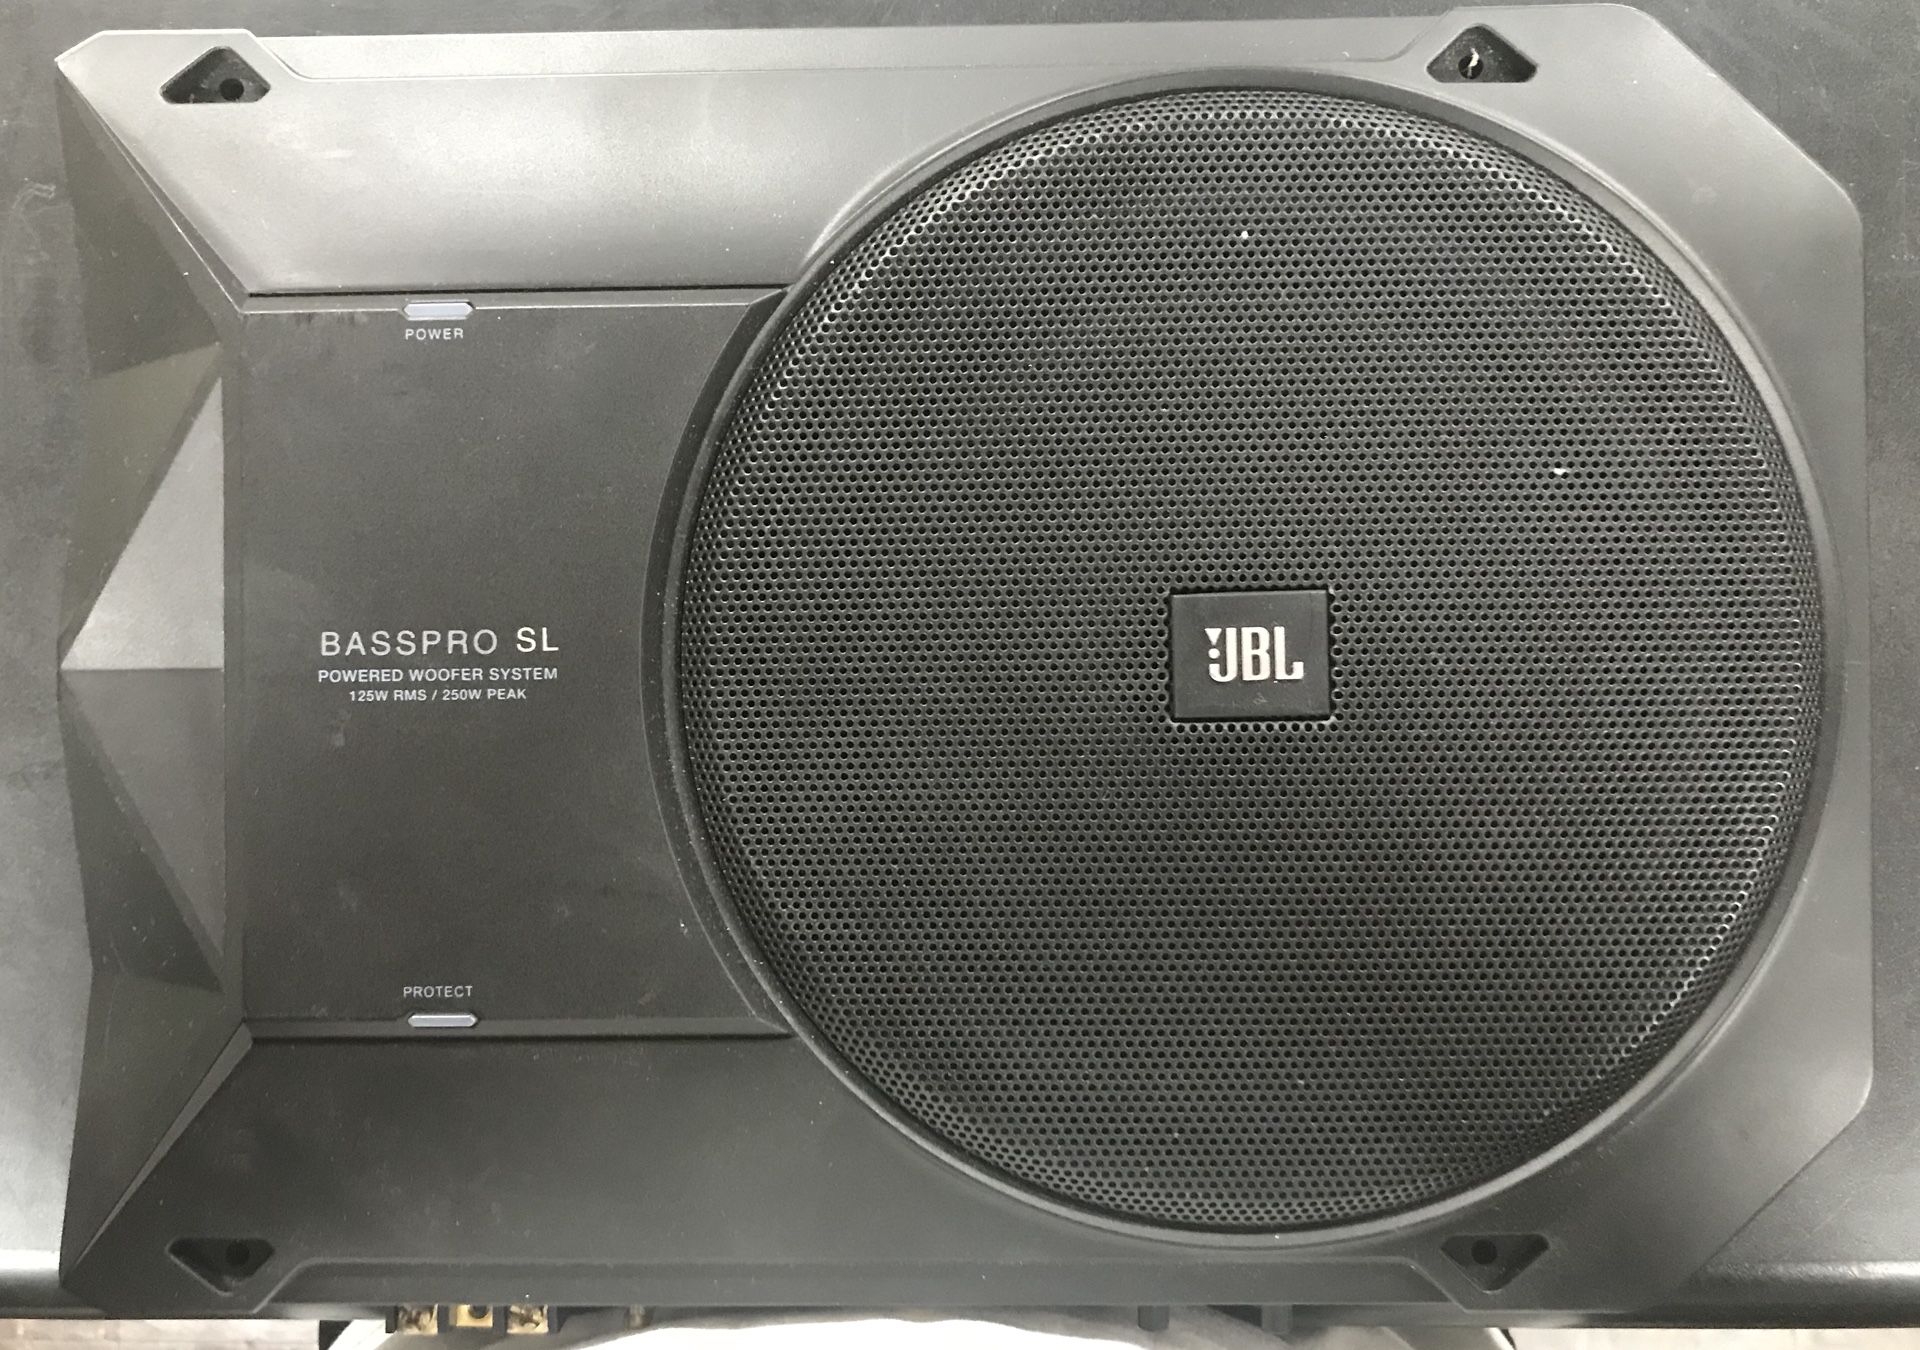 BassPro SL - JBL 8" 125W RMS Powered Under-Seat Compact Subwoofer Enclosure System negotiable